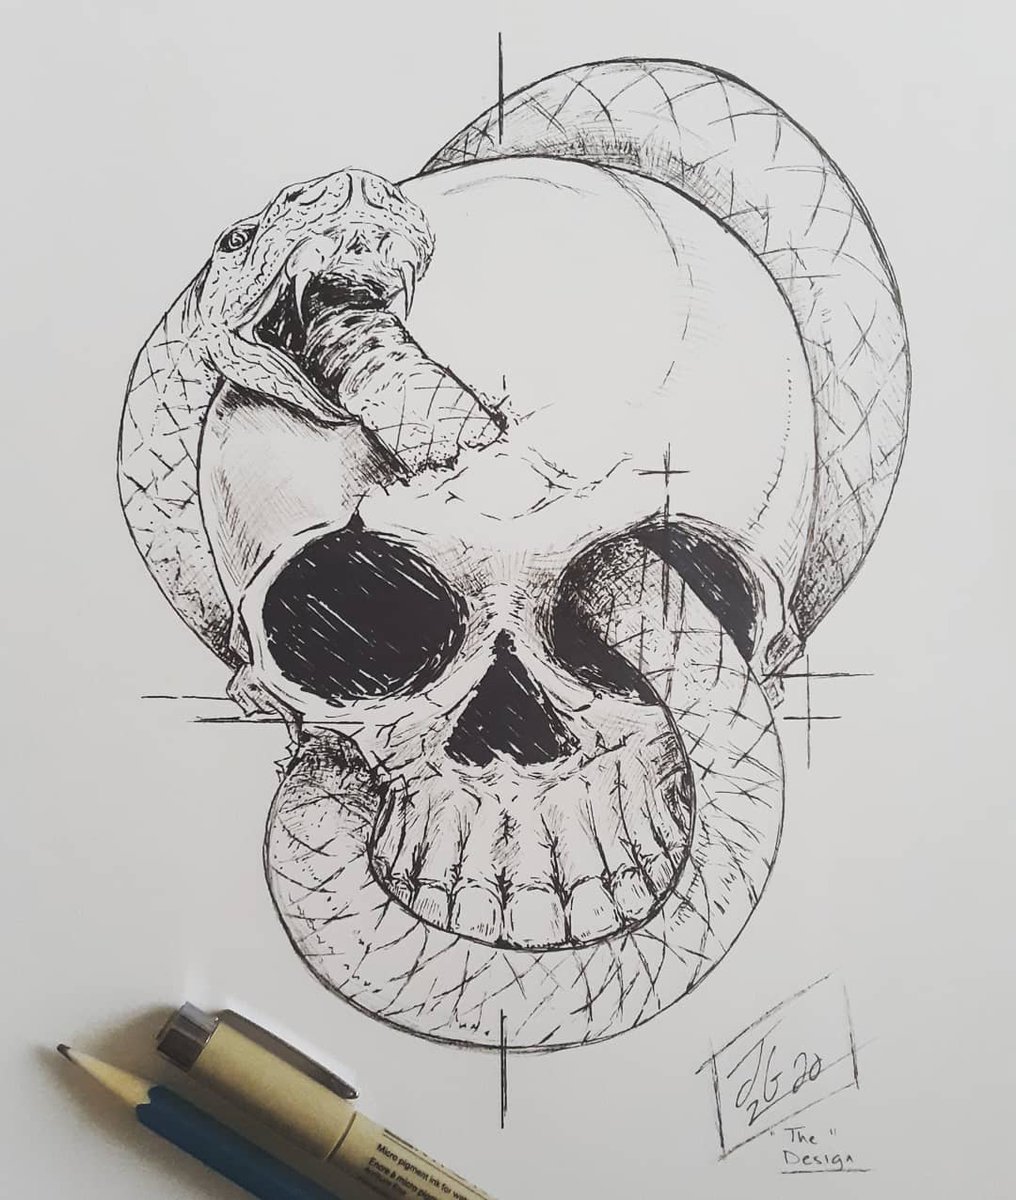 And it's complete ☠ 'The Design' ~ A very #symbolic #micronpenart #illustration 🤘 #skull #ouroboros #life #Death #reincarnation #cycle #Humanity #thirdeye